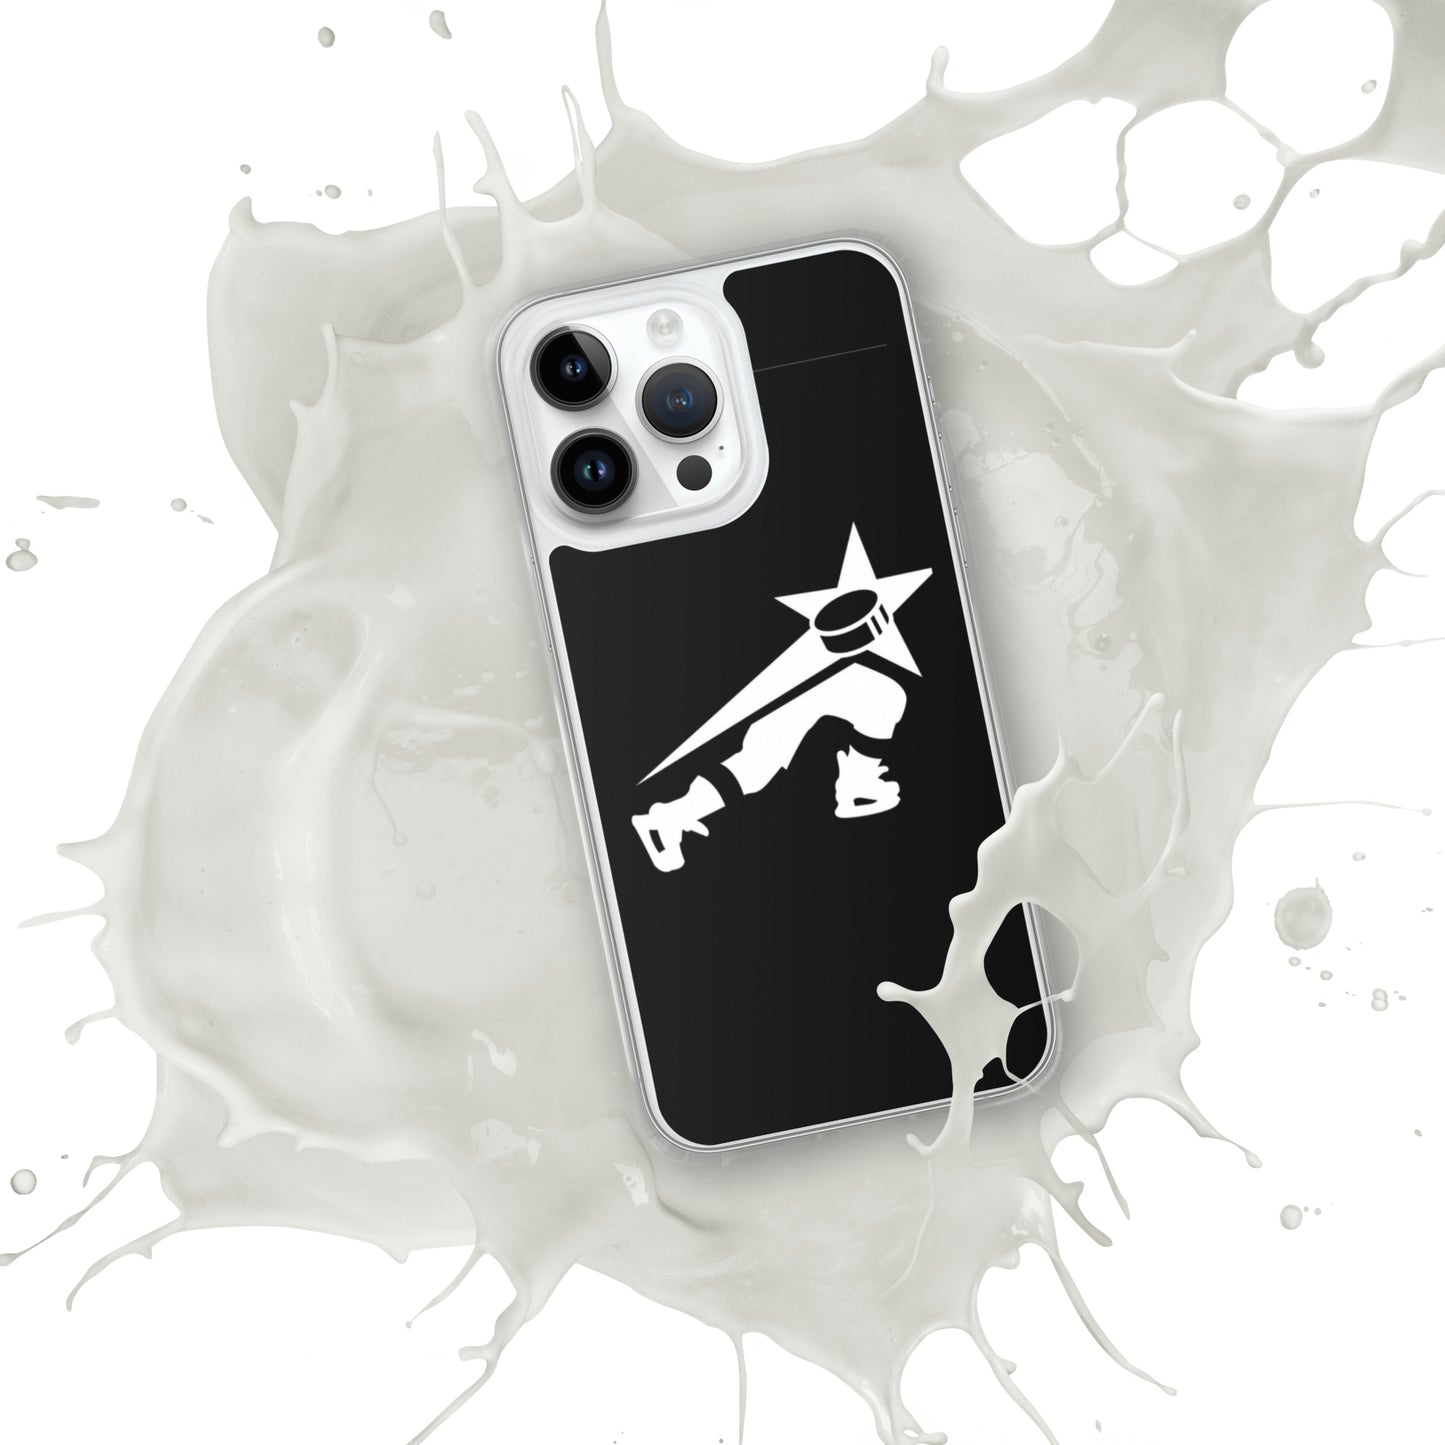 iPhone black case featuring a stylized white character with a star head, placed atop a spilled white liquid background